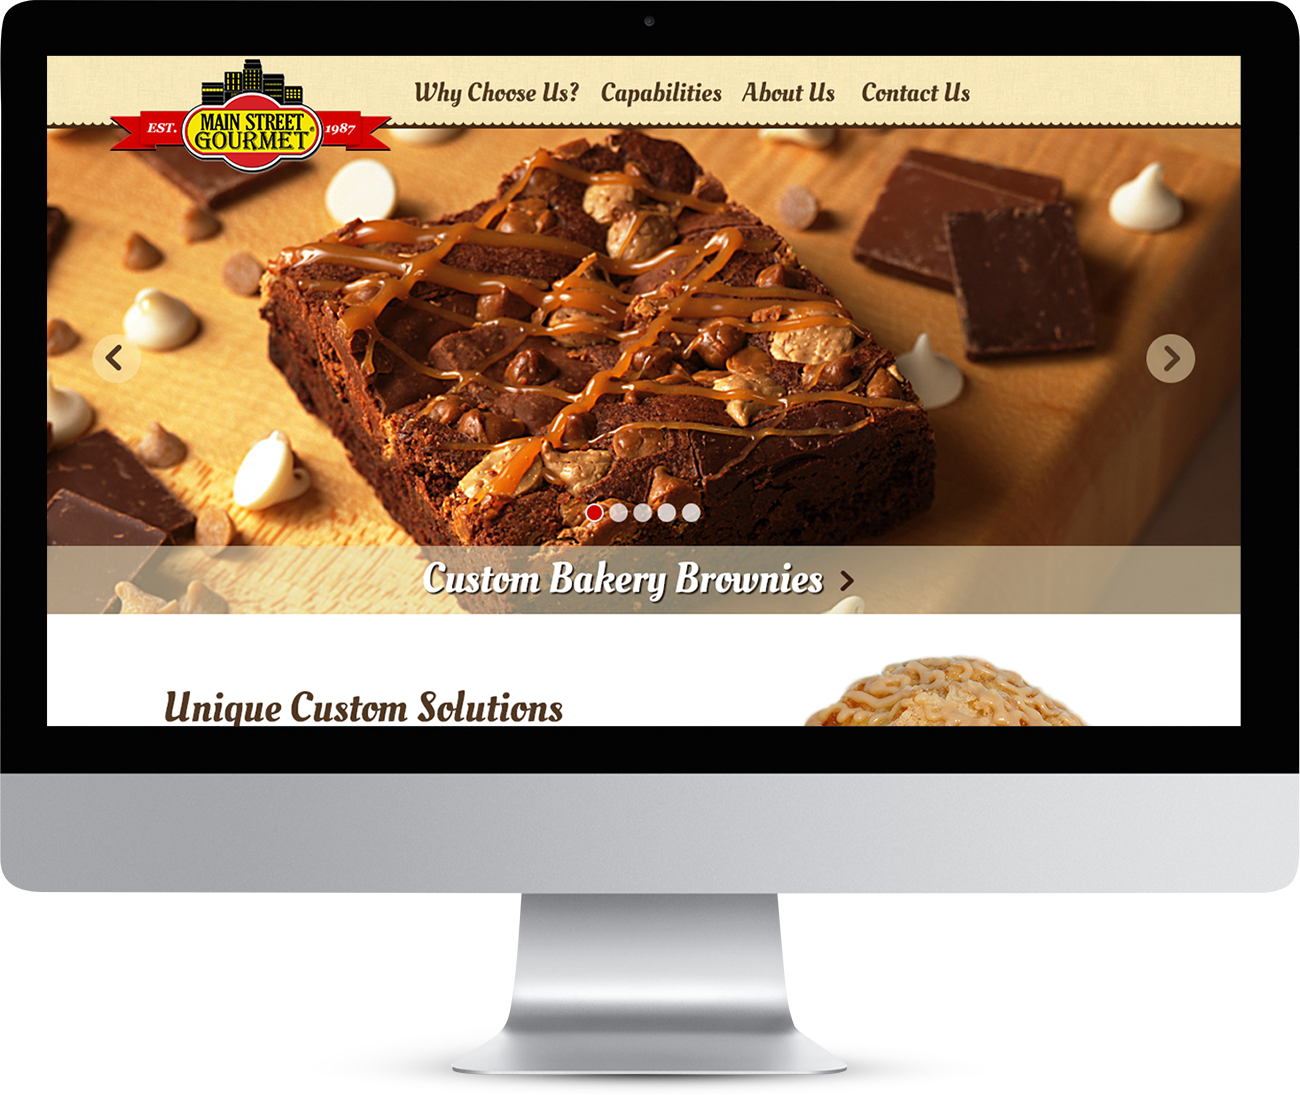 Main Street Gourmet website homepage showing on a monitor screen